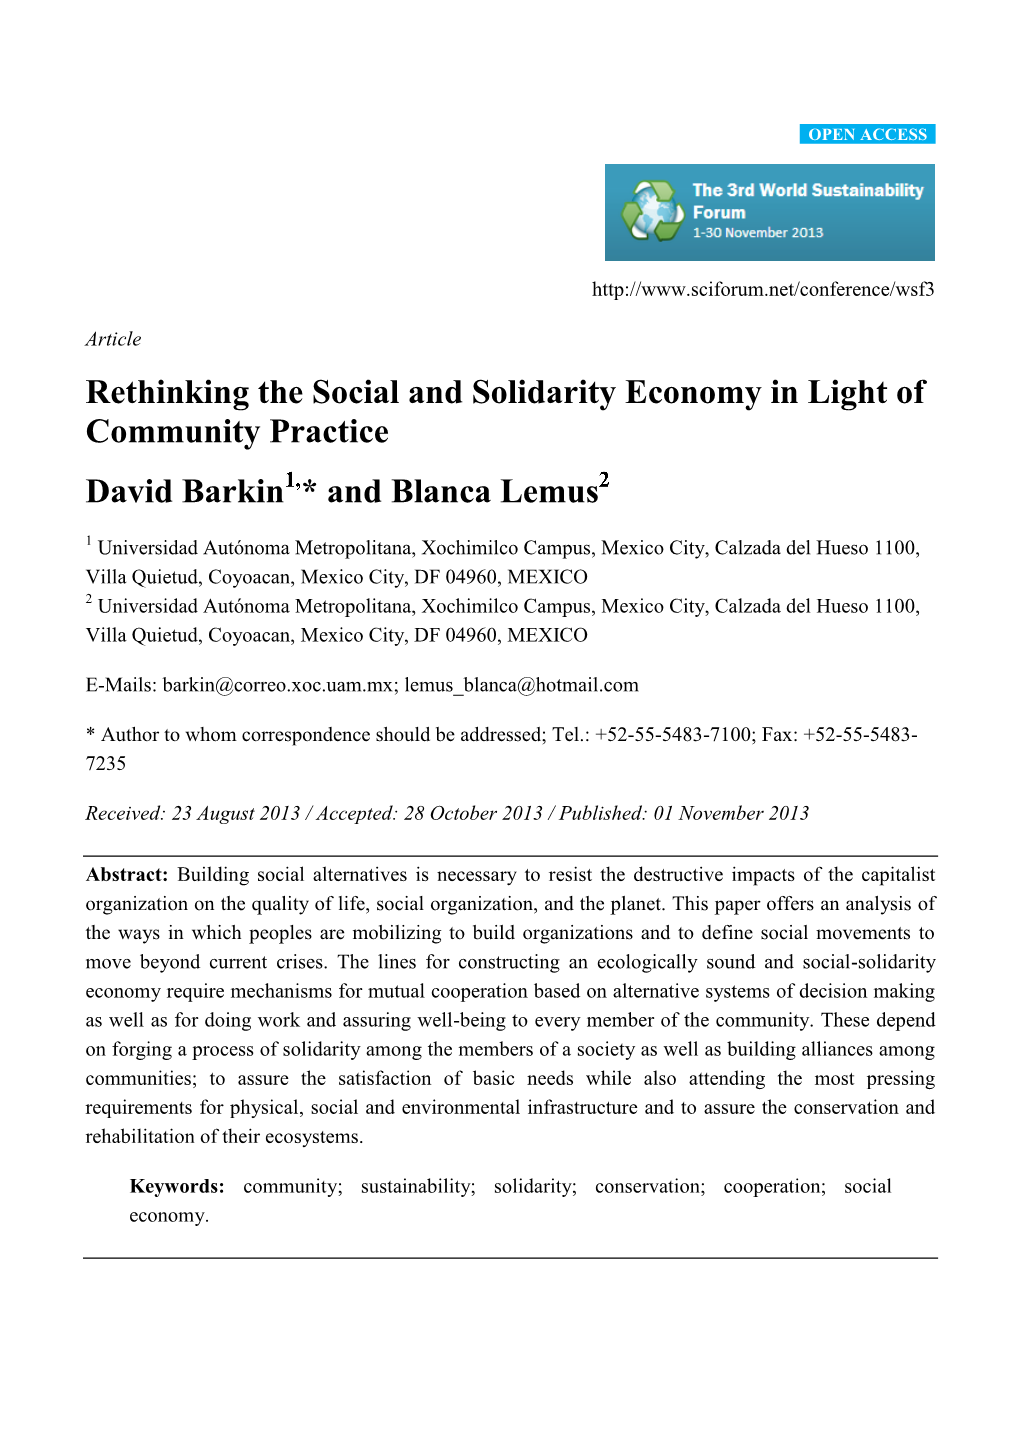 Rethinking the Social and Solidarity Economy in Light of Community Practice David Barkin * and Blanca Lemus